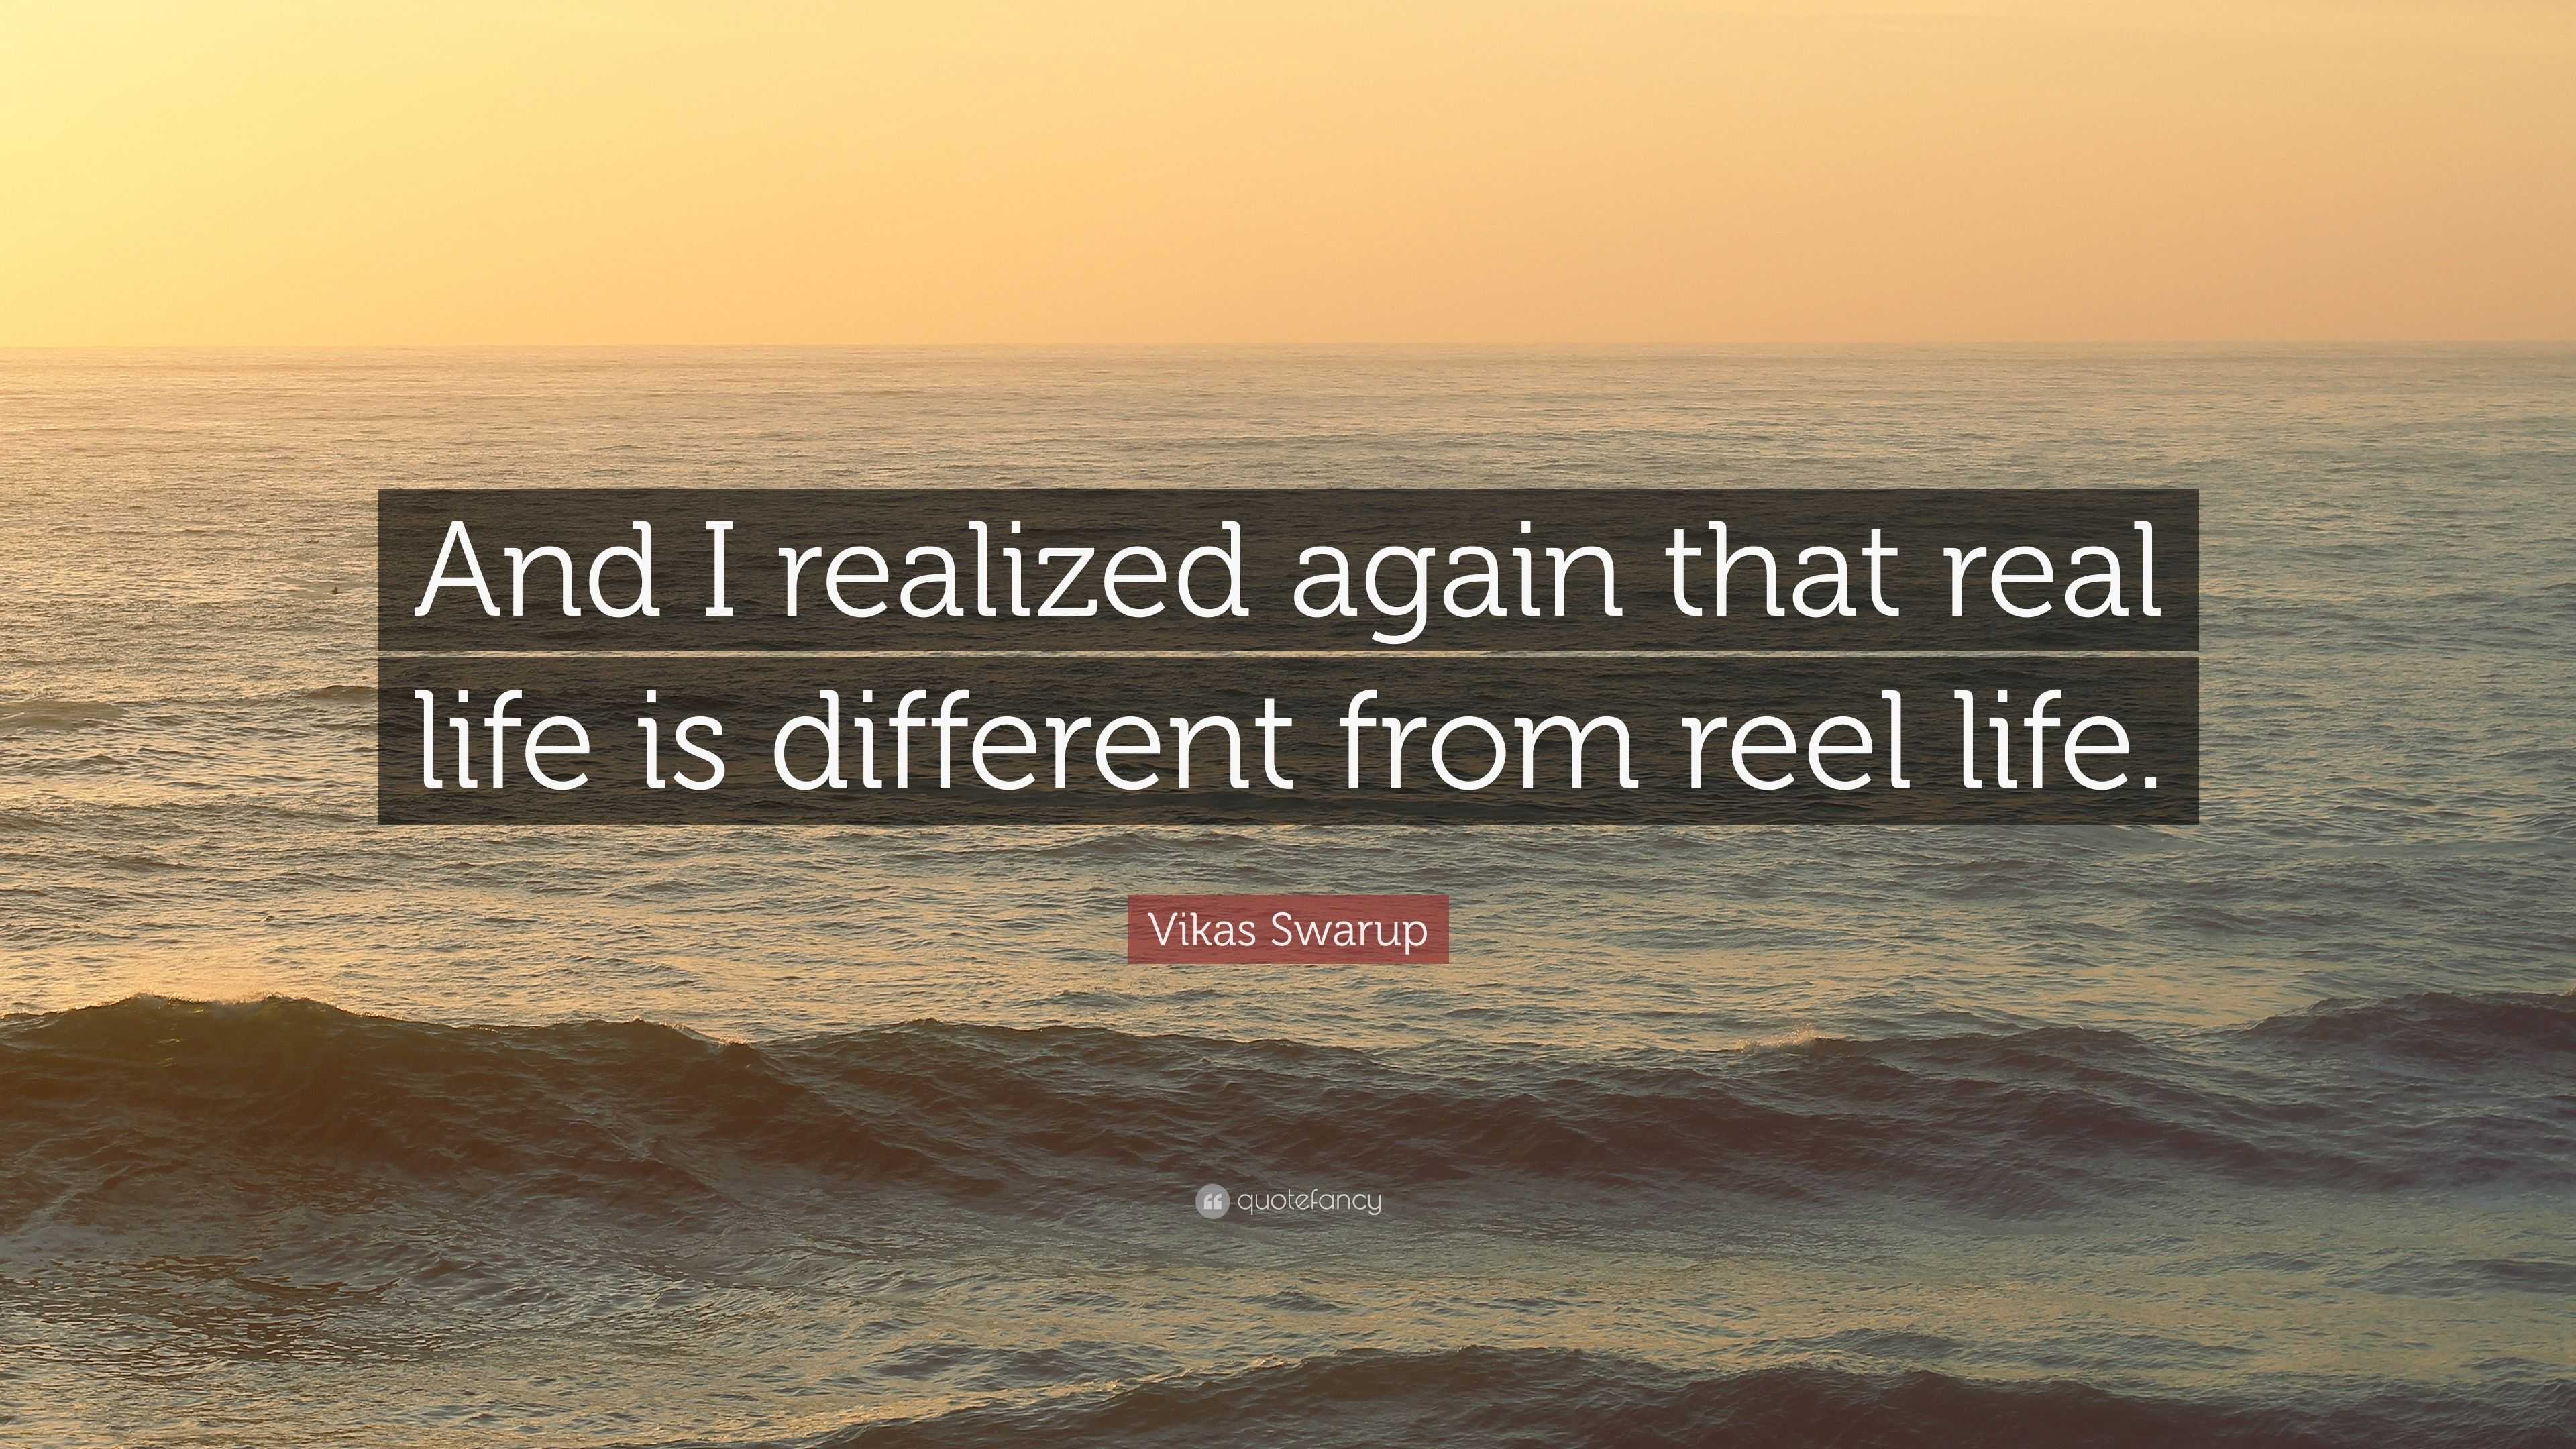 Vikas Swarup Quote: “And I realized again that real life is